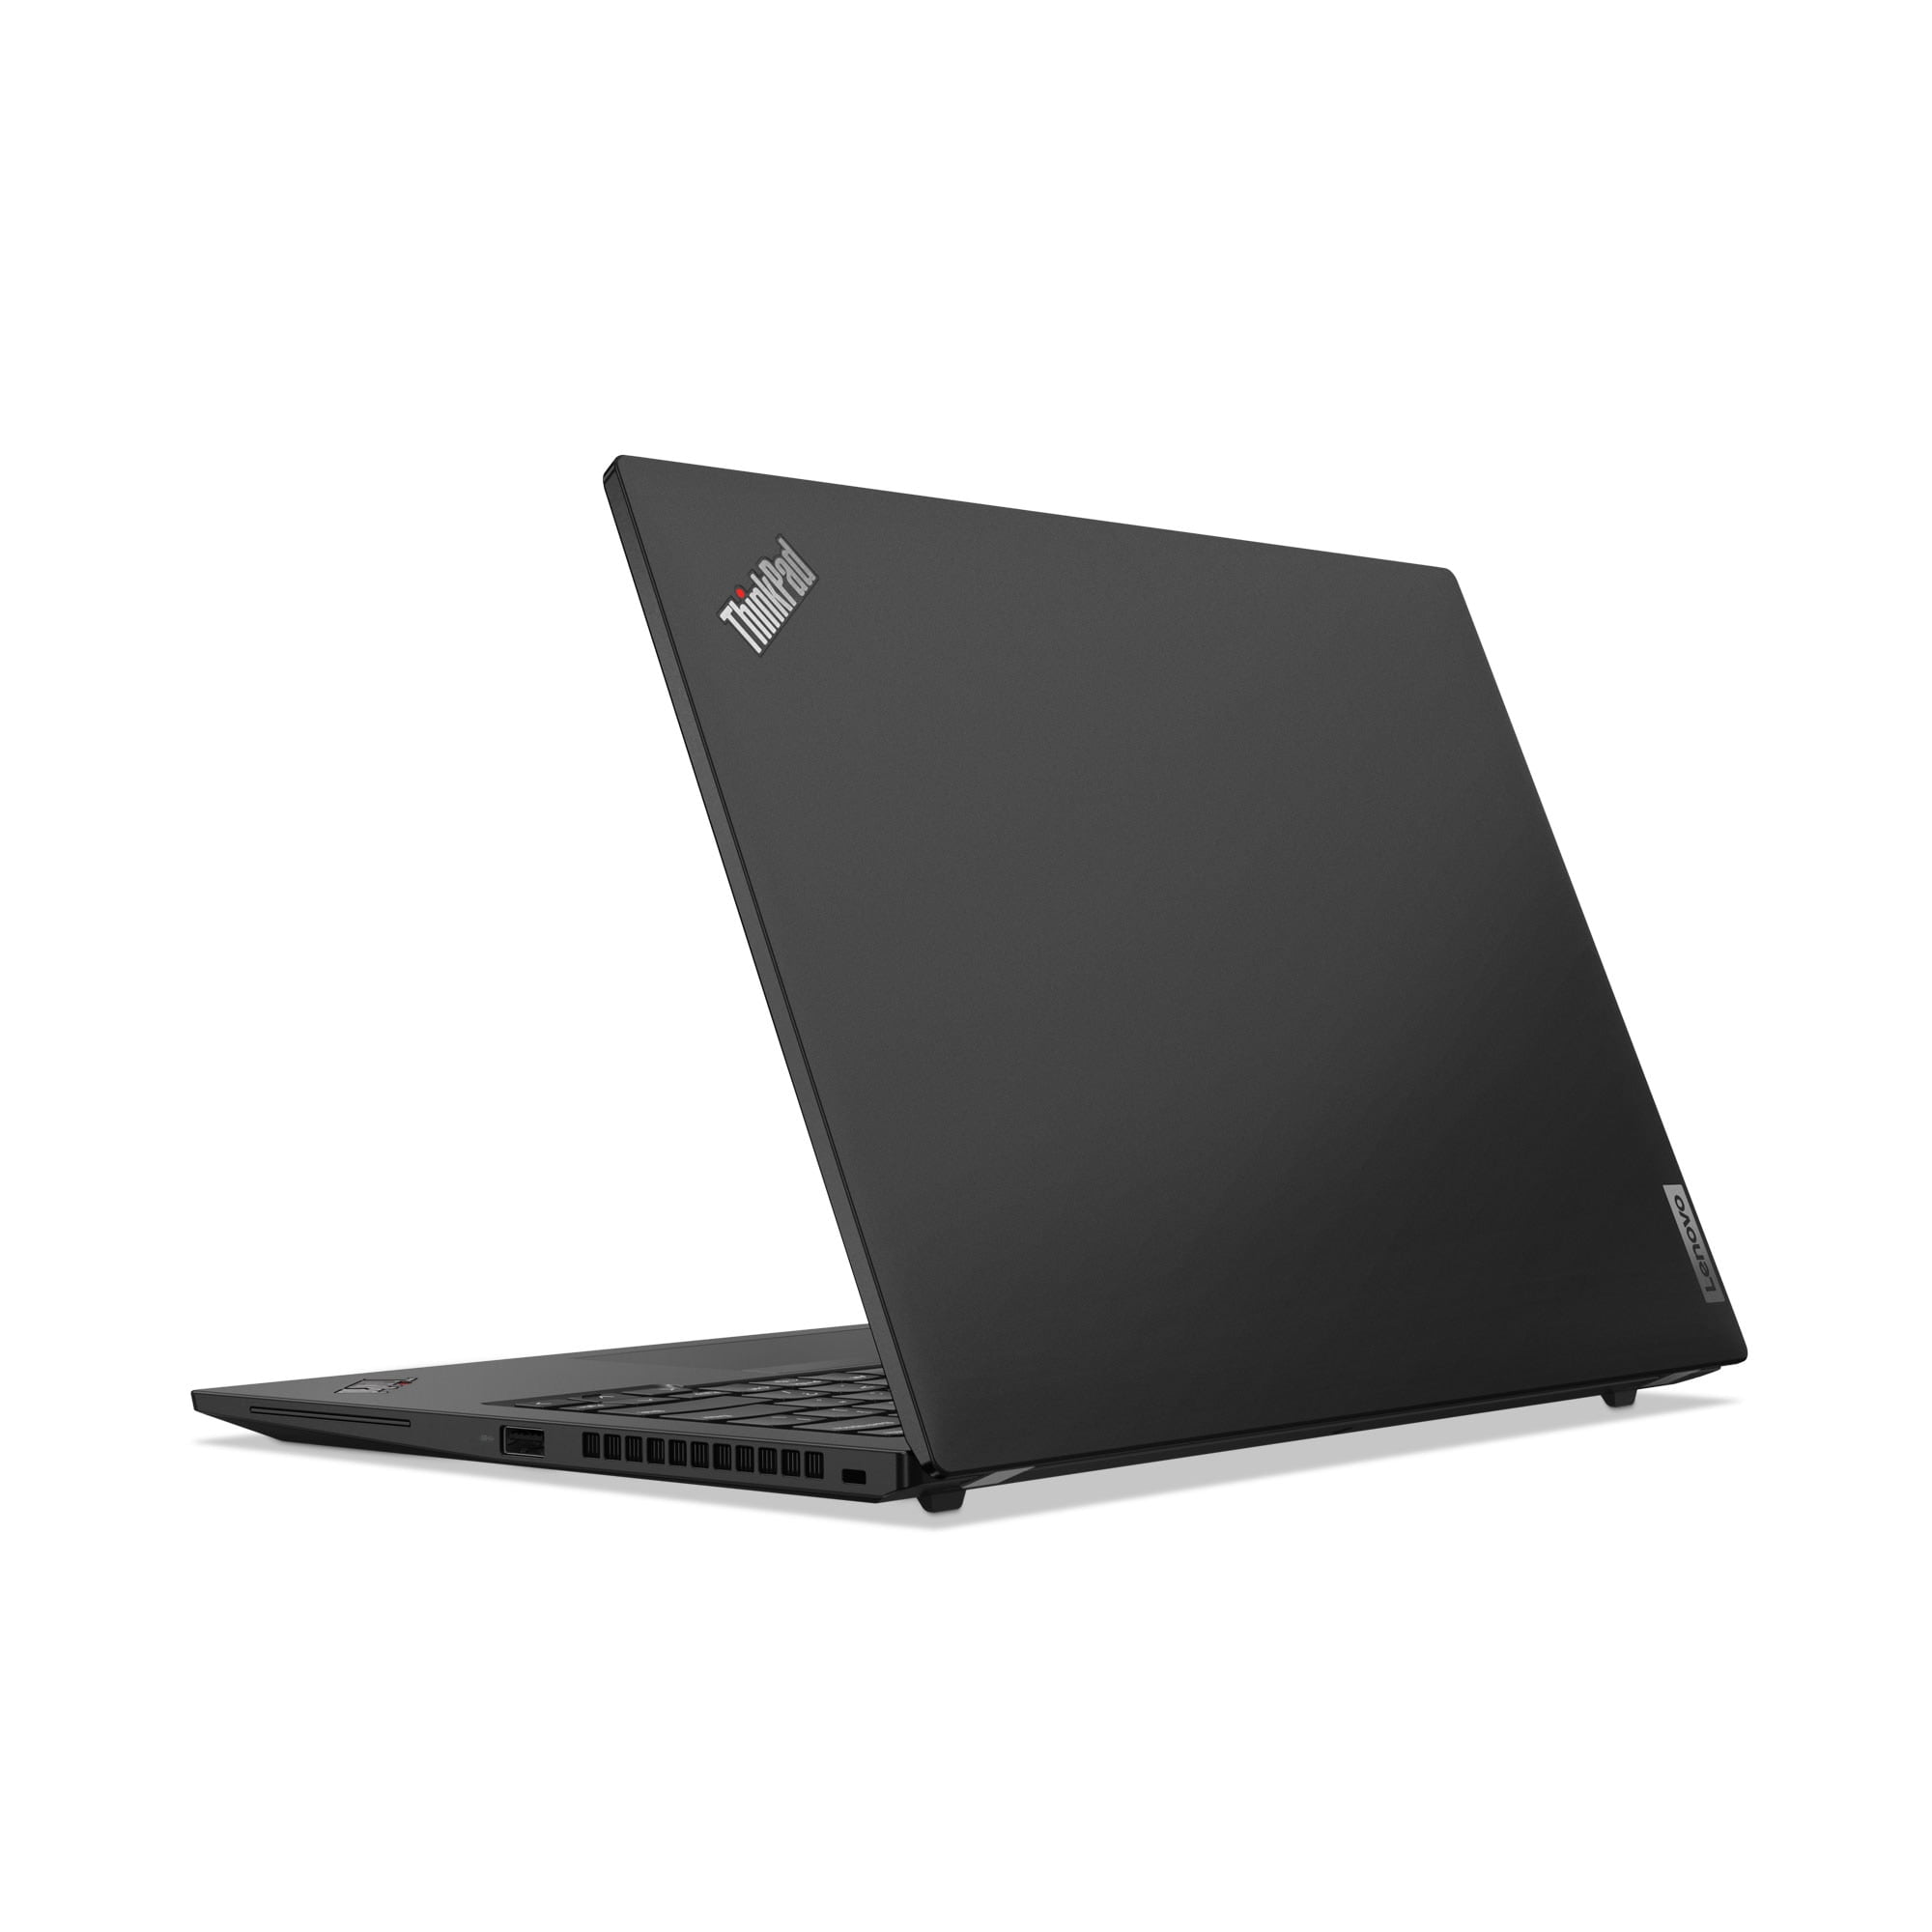 lethal Sociology Light Lenovo ThinkPad T14s Gen 3 Intel Laptop, 14.0" IPS Touch Low Cost Low  Weight, vPro®, Iris Xe Graphics, 32GB, 2TB, Win 10 Pro Preinstalled Through  Downgrade Rights In Win 11 Pro - Walmart.com